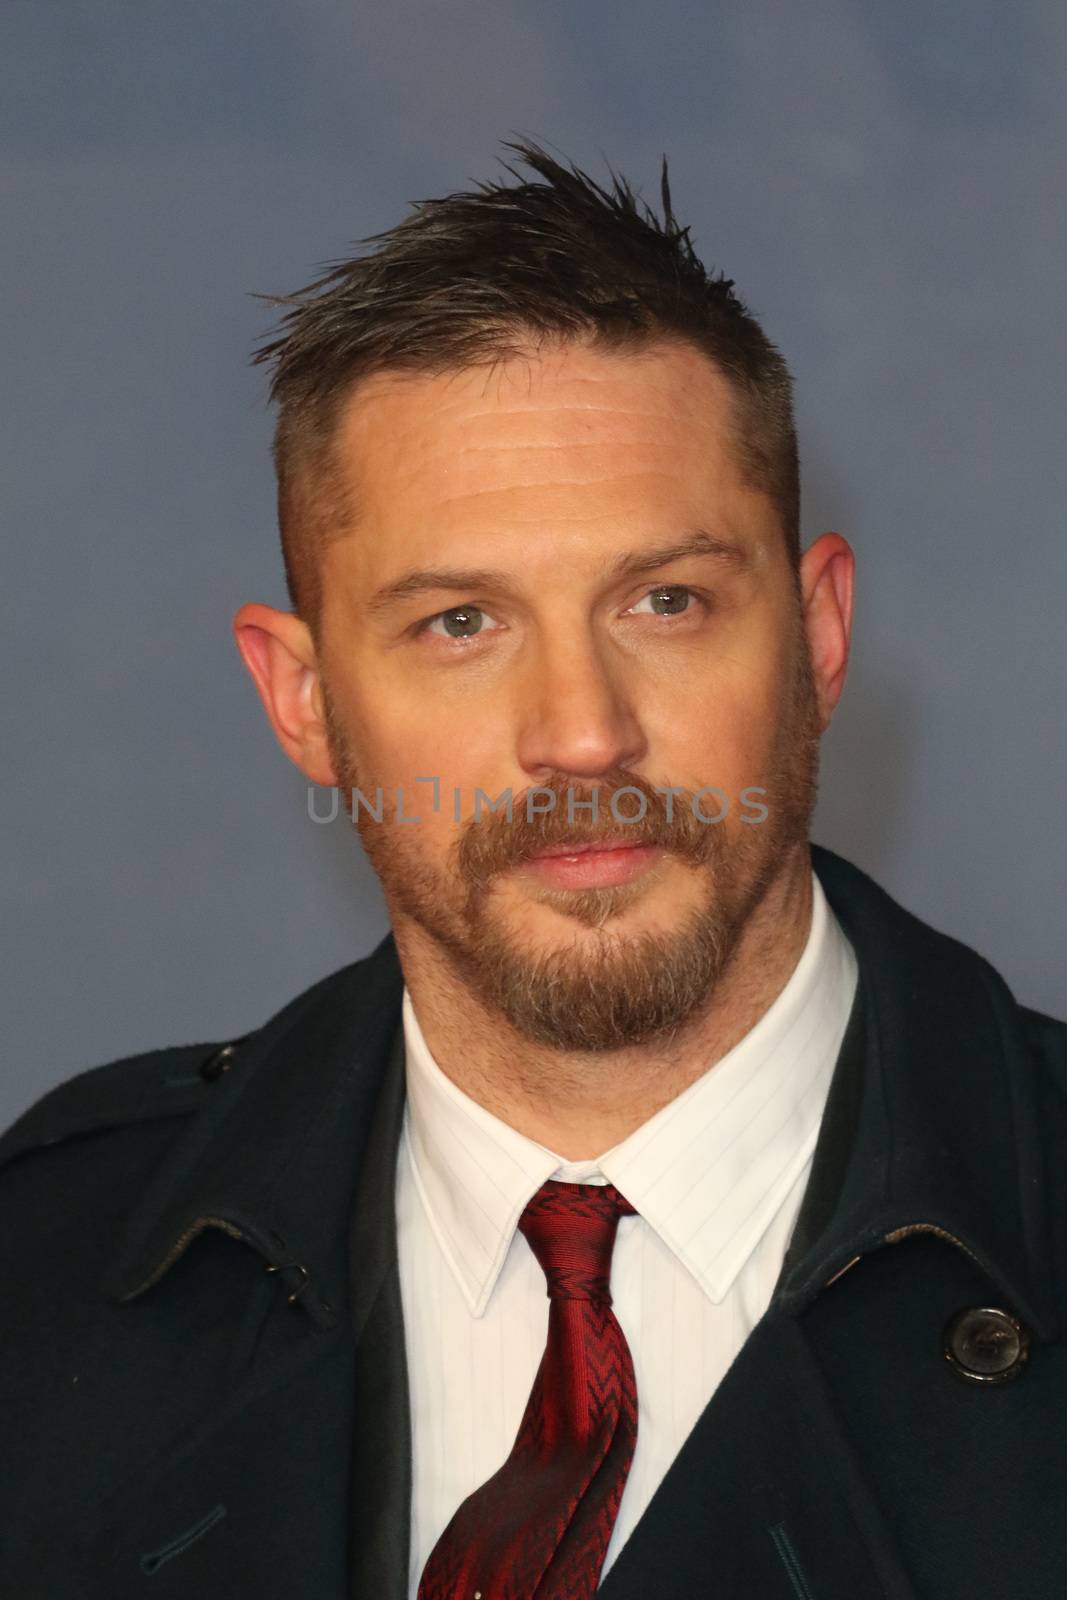 UK, London: Tom Hardy arrives on the red carpet at Leicester Square in London on January 14, 2016 for the UK premiere of the Revenant, Alejandro Gonzalez Inarritu's Oscar-nominated film starring Leonardo DiCaprio.